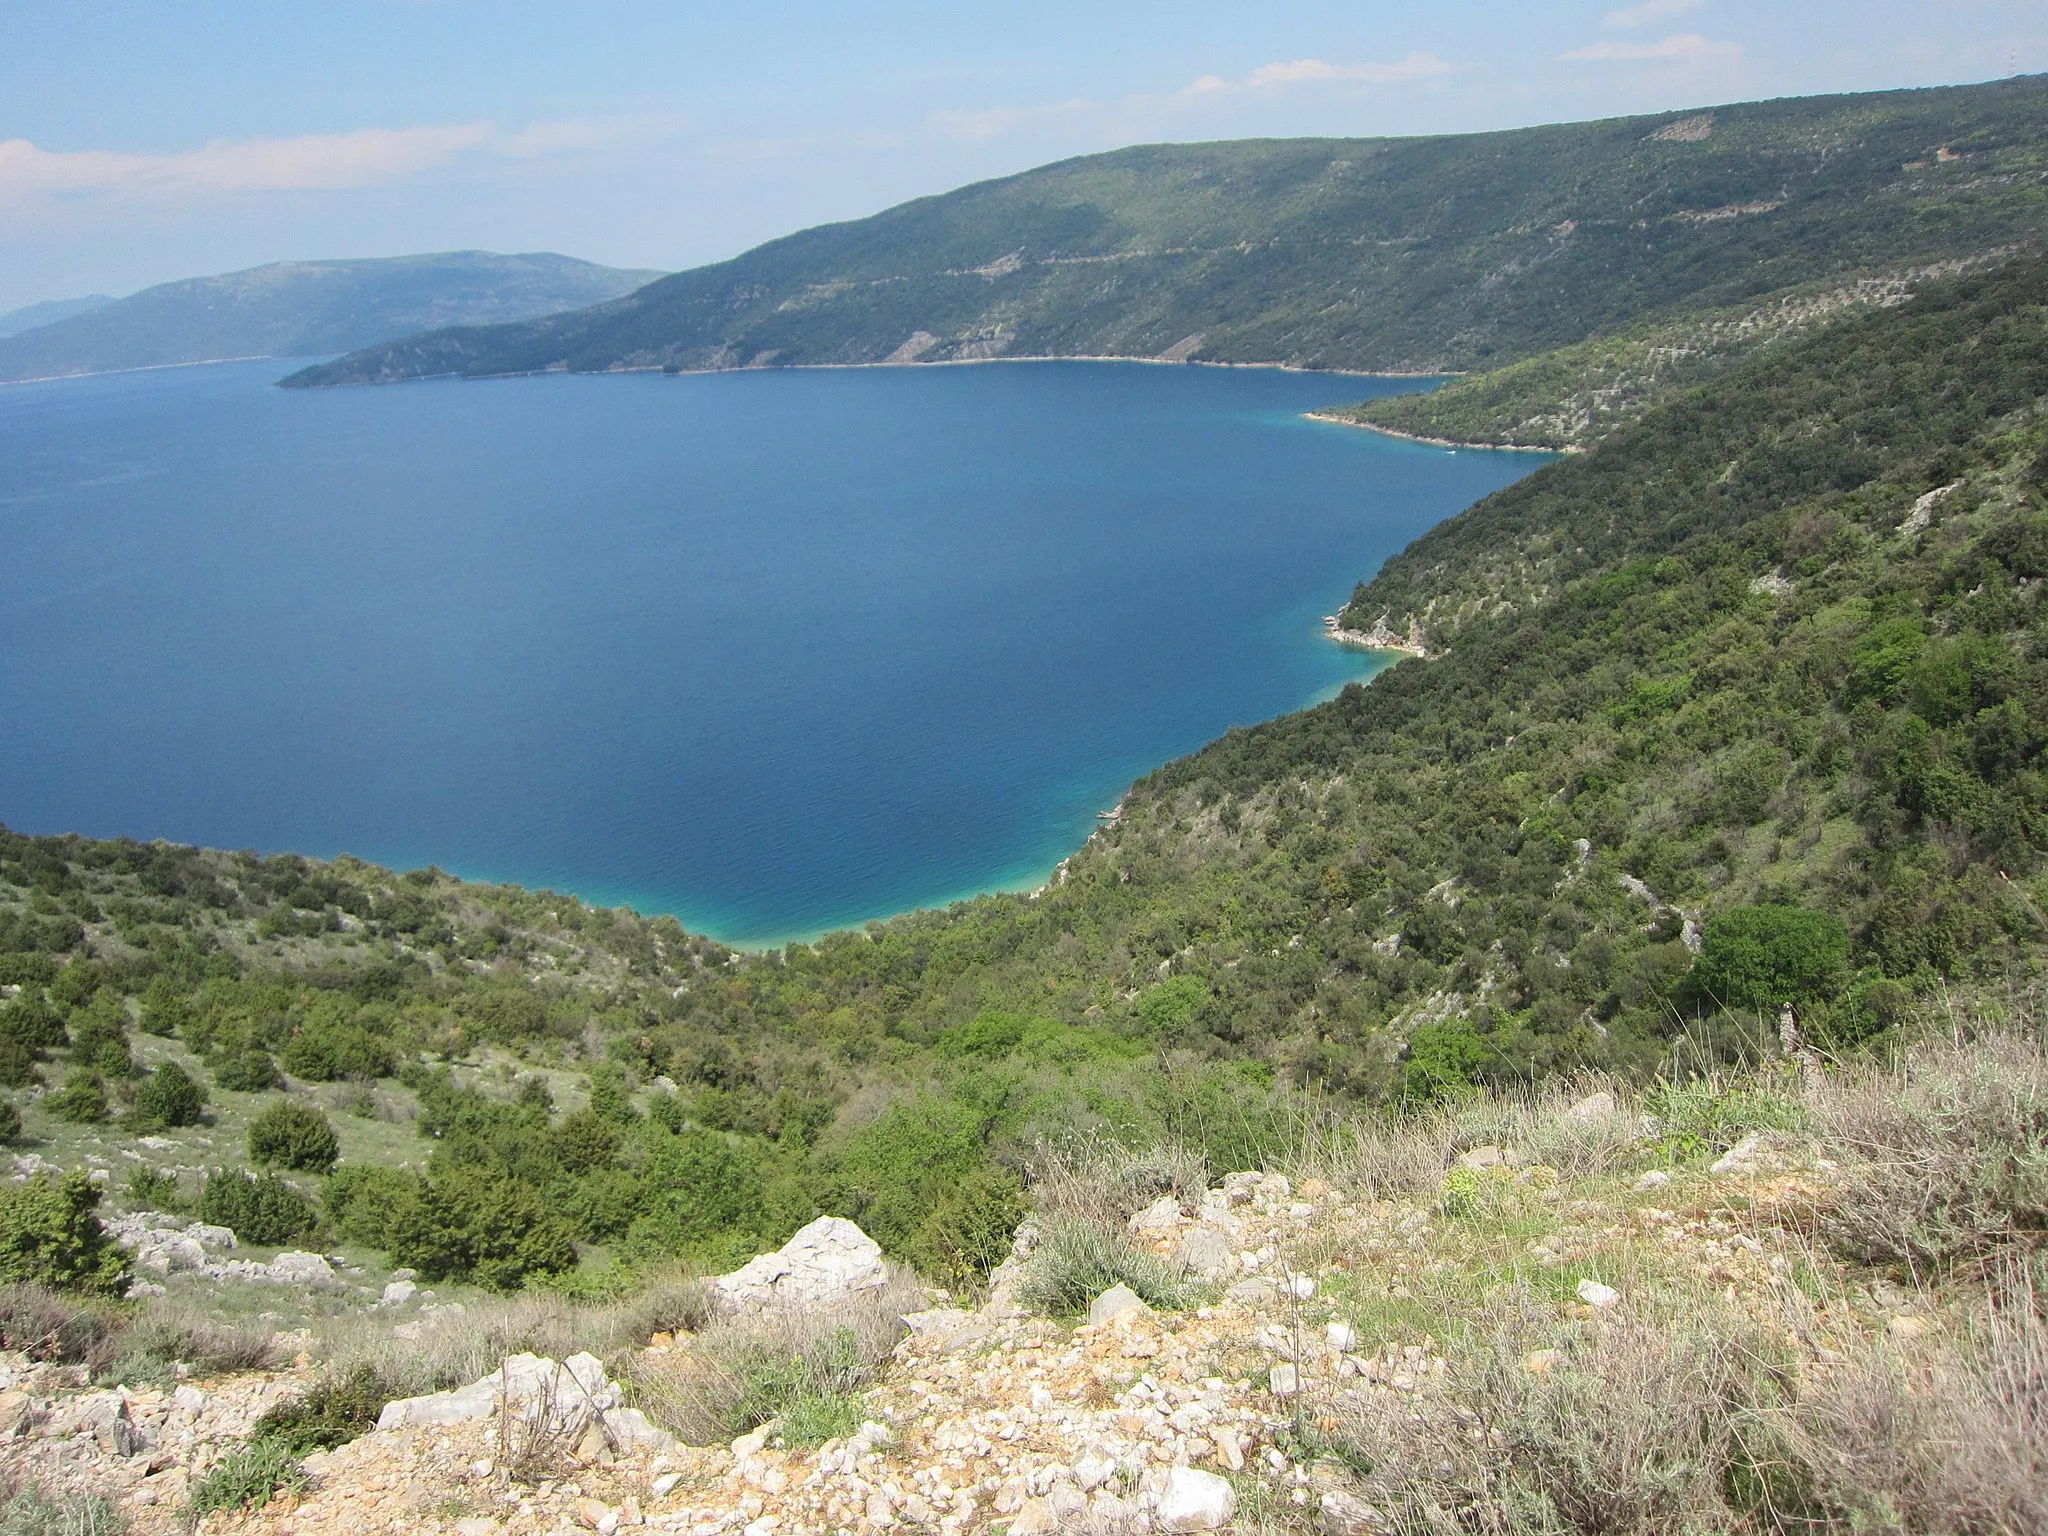 Photo showing: Between the town of Cres and Valun, Croatia.